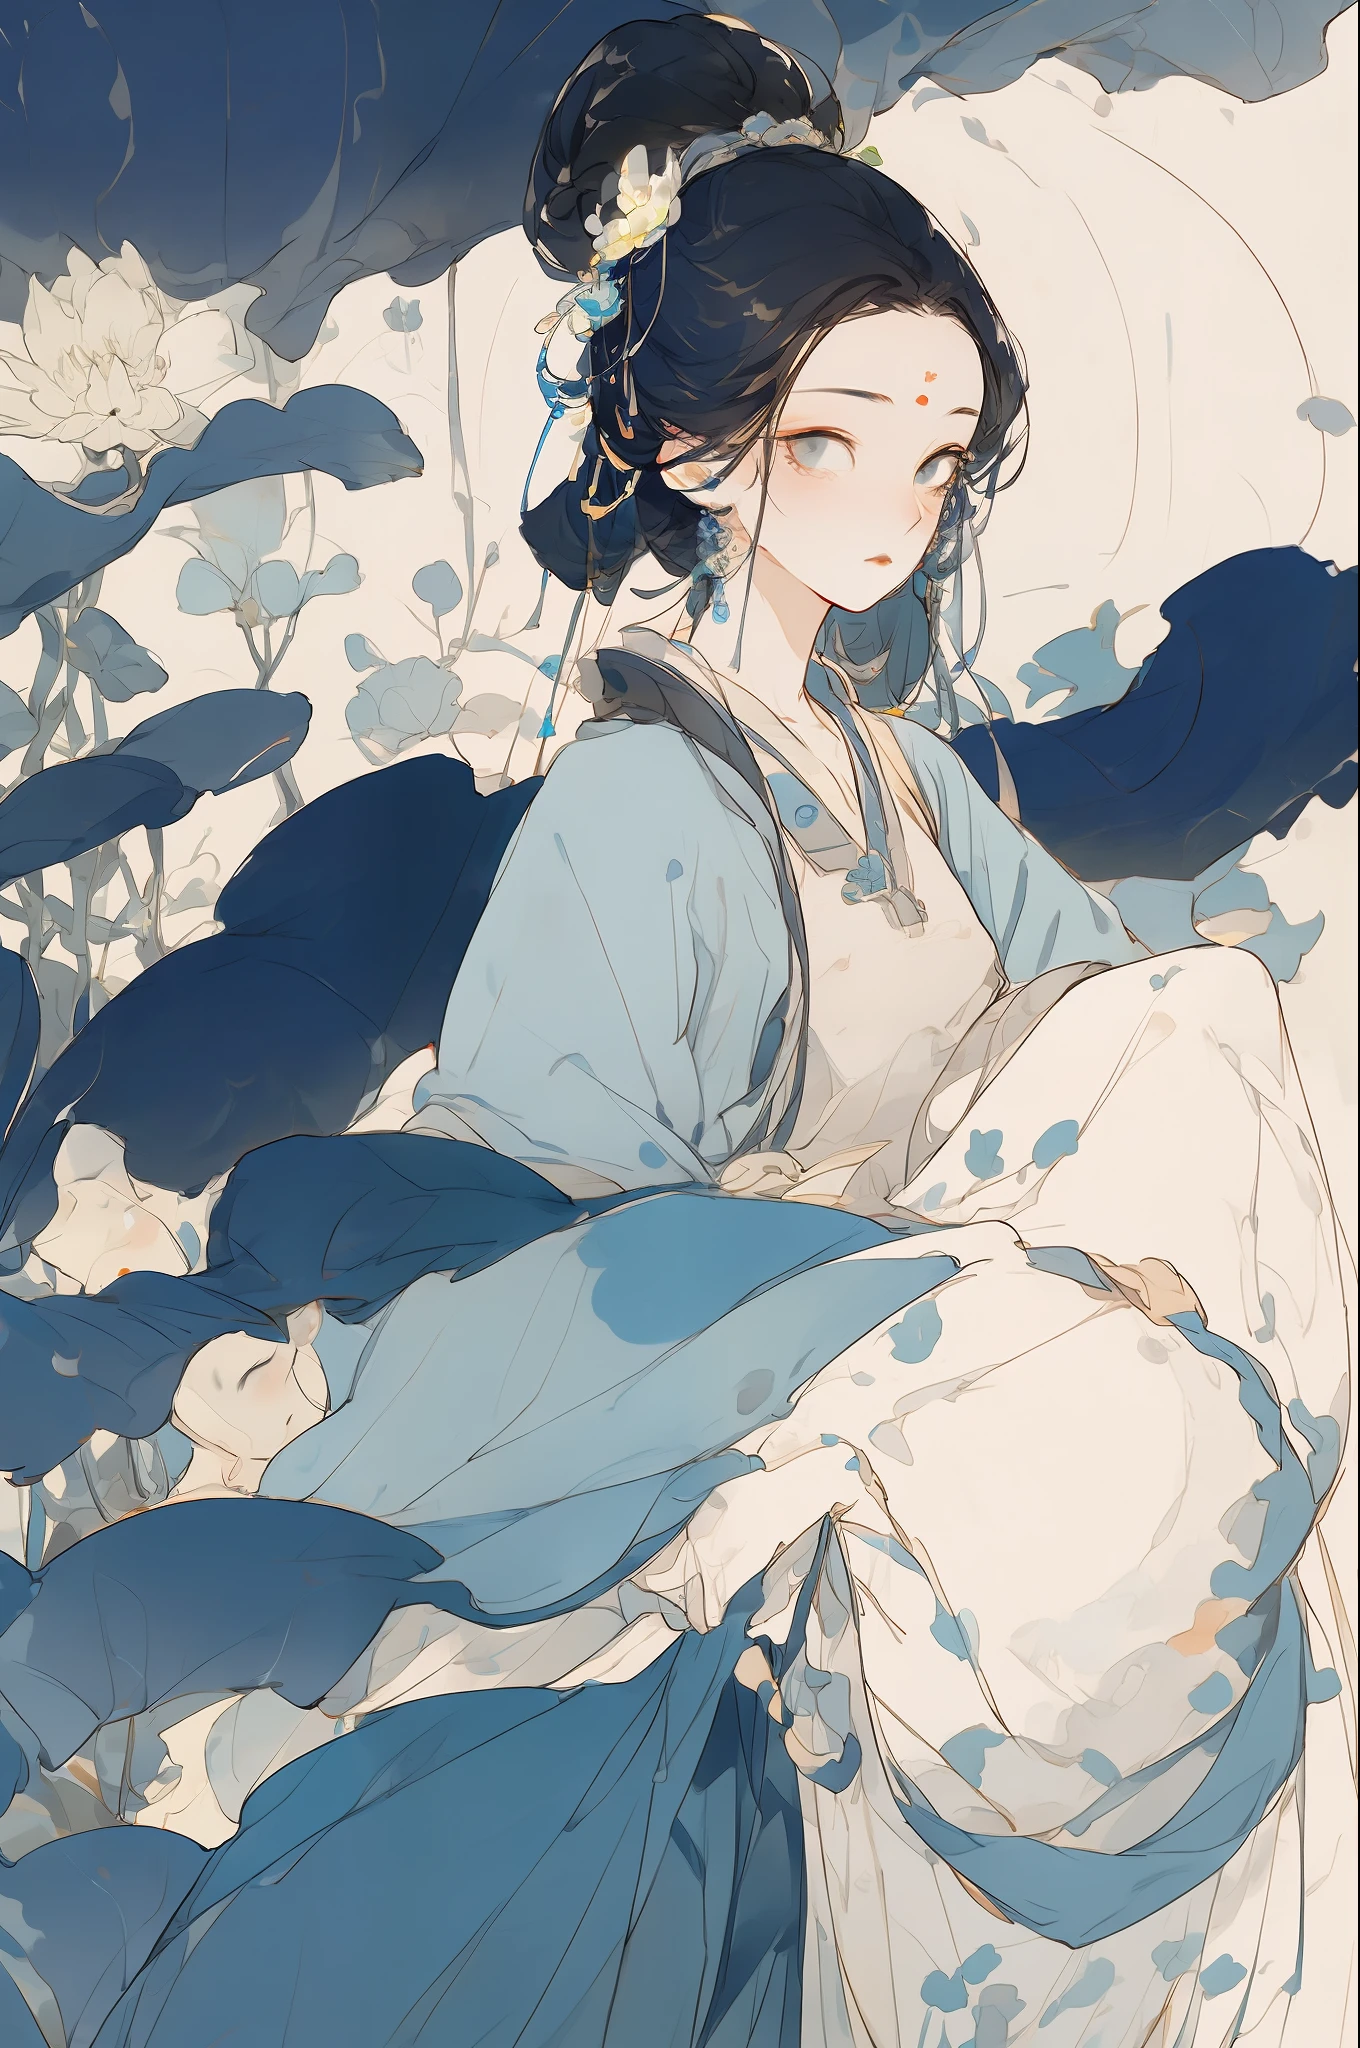 Ancient Chinese beauty sitting - SeaArt AI